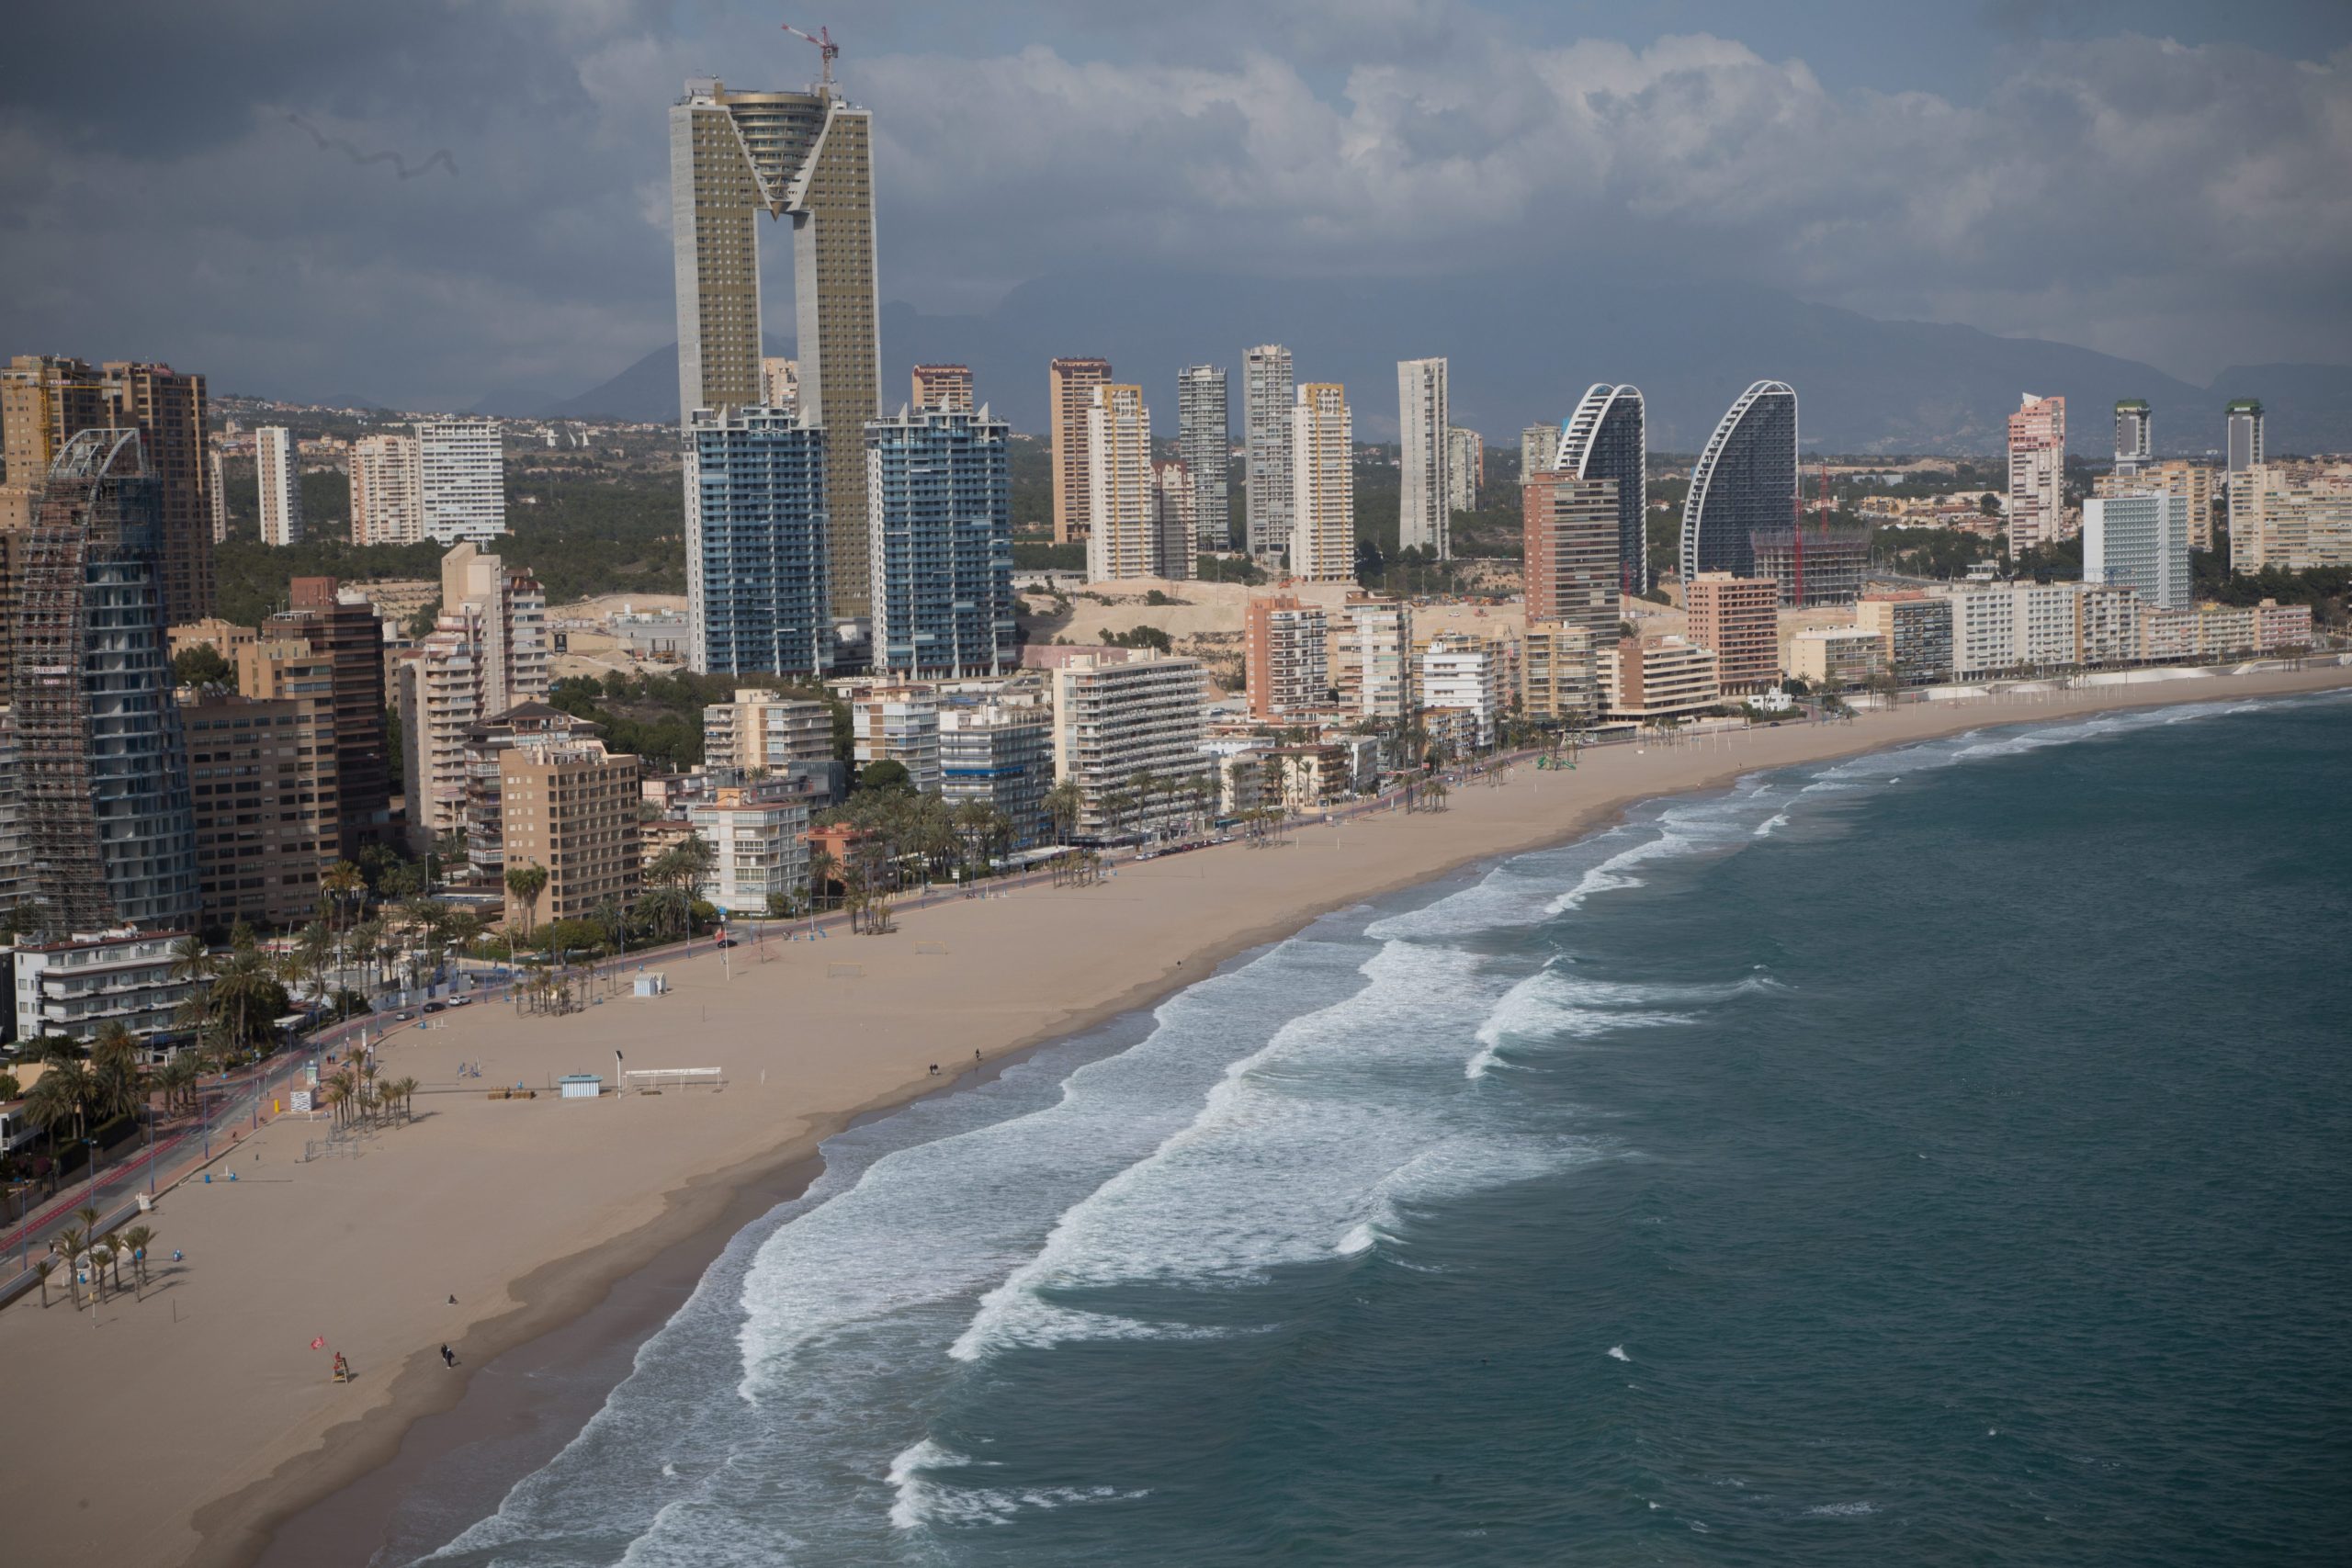 Brits will continue flocking to Spain's Benidorm 'despite the negative press coverage in UK tabloids', say tourism experts